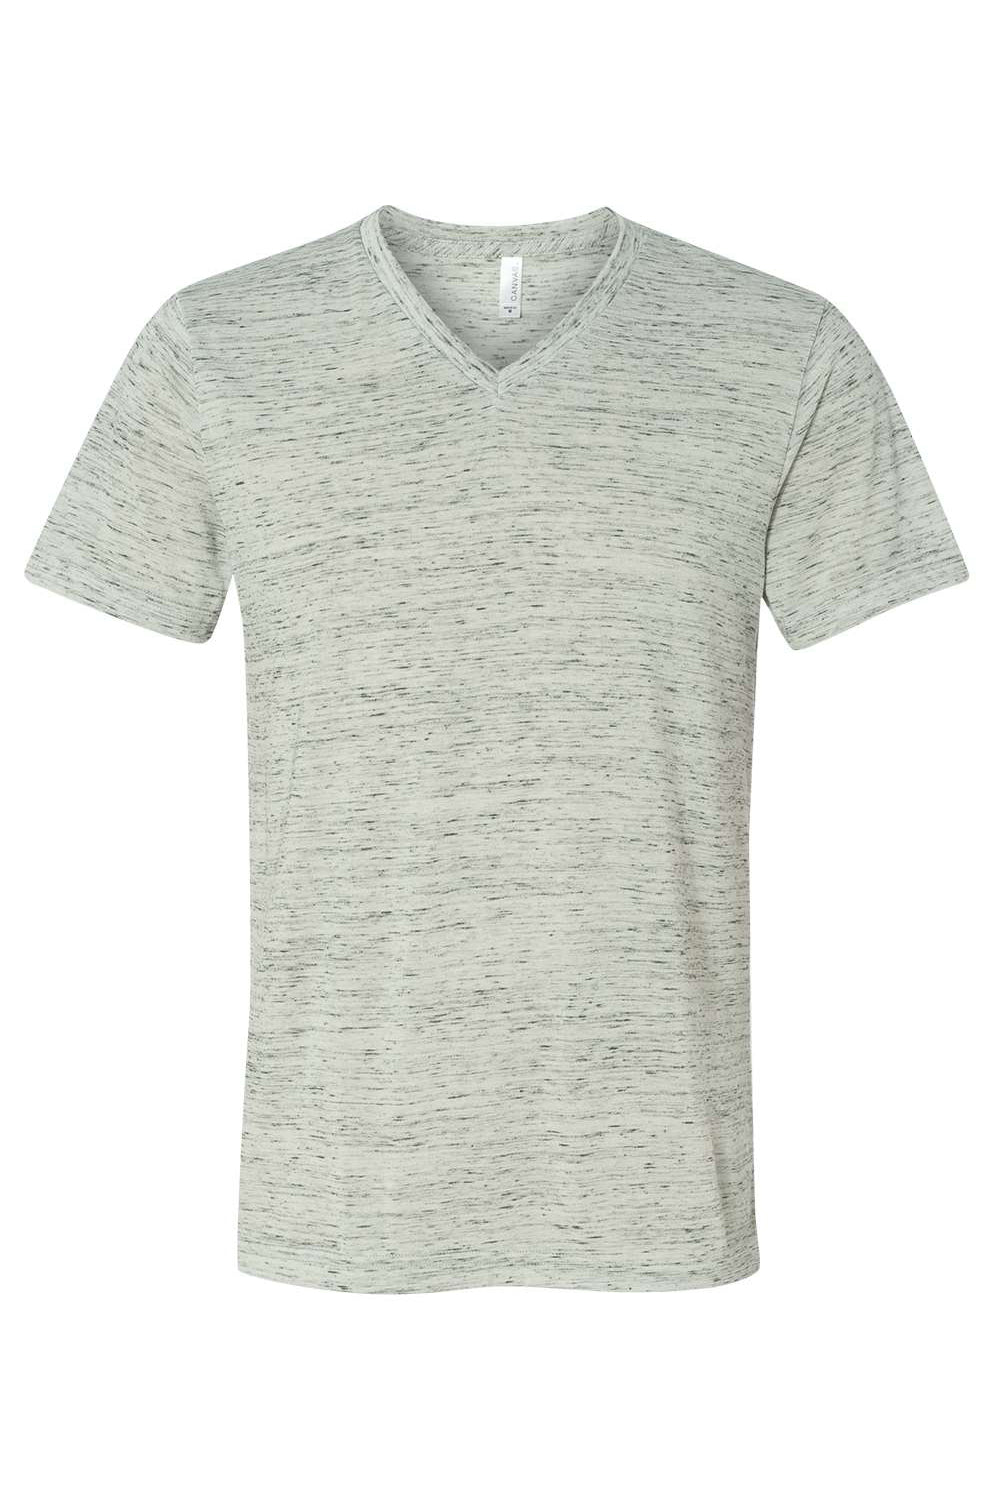 Bella + Canvas BC3005/3005/3655C Mens Jersey Short Sleeve V-Neck T-Shirt White Marble Flat Front